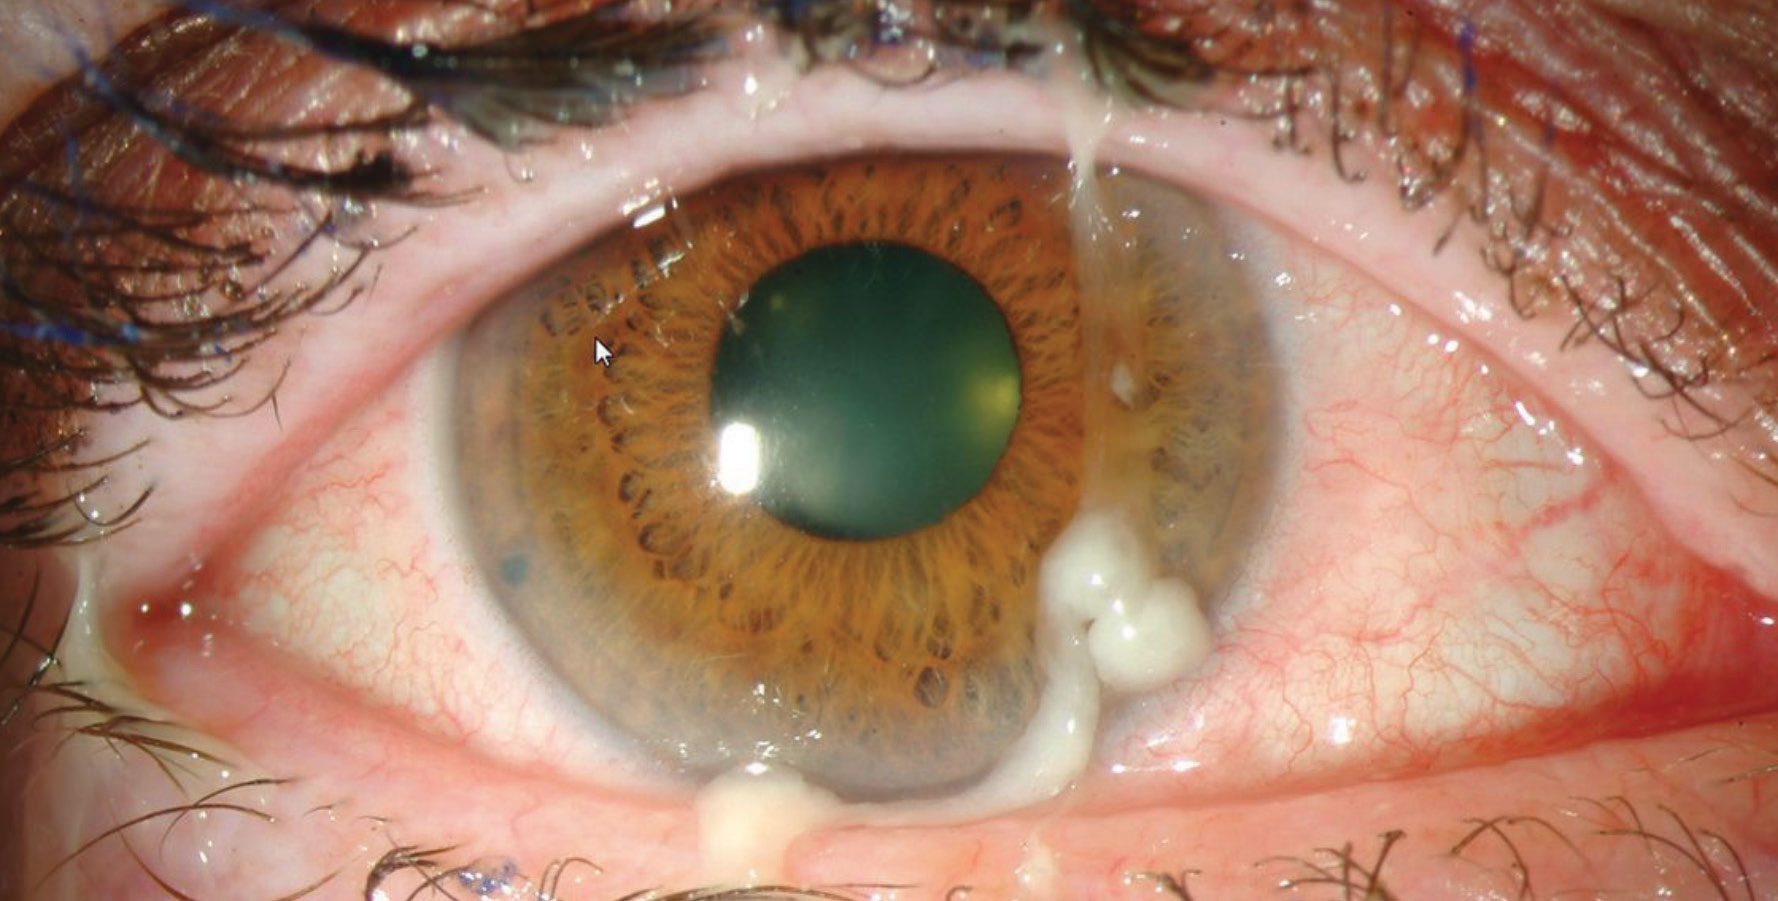 Bacterial conjunctivitis is often a byproduct of the natural flora of the individual and is most commonly caused by Staphylococcus aureus, Streptococcus pneumonia and Haemophilus.